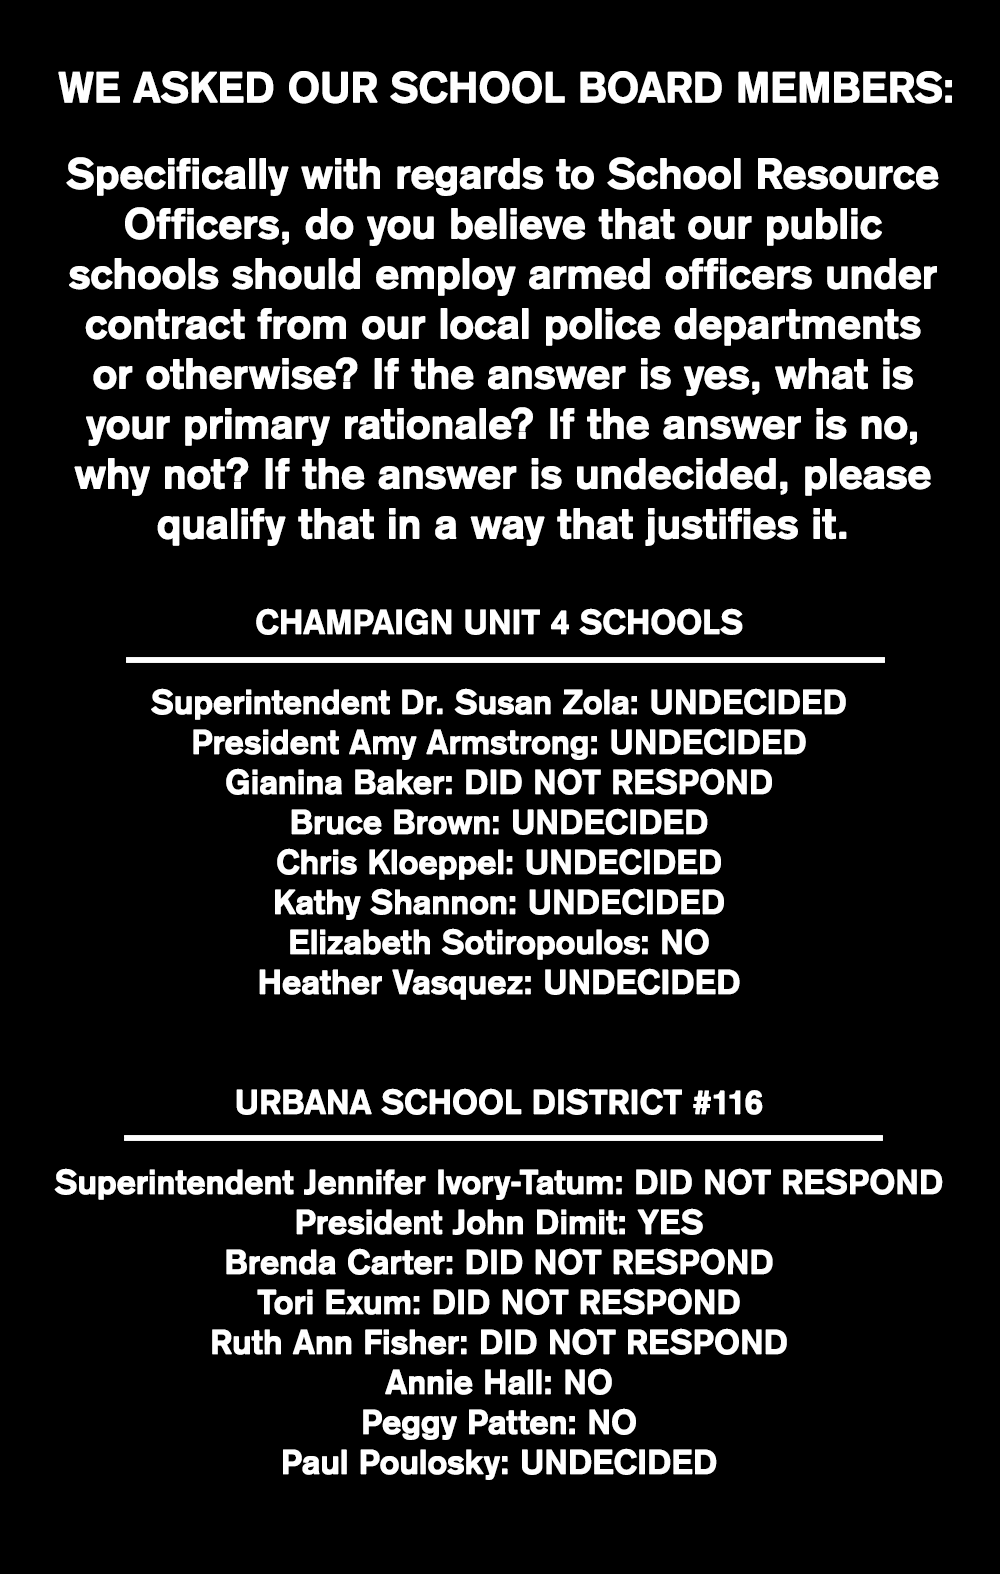 IMAGE: The question posed and the responses from each school board member. Image by Smile Politely.